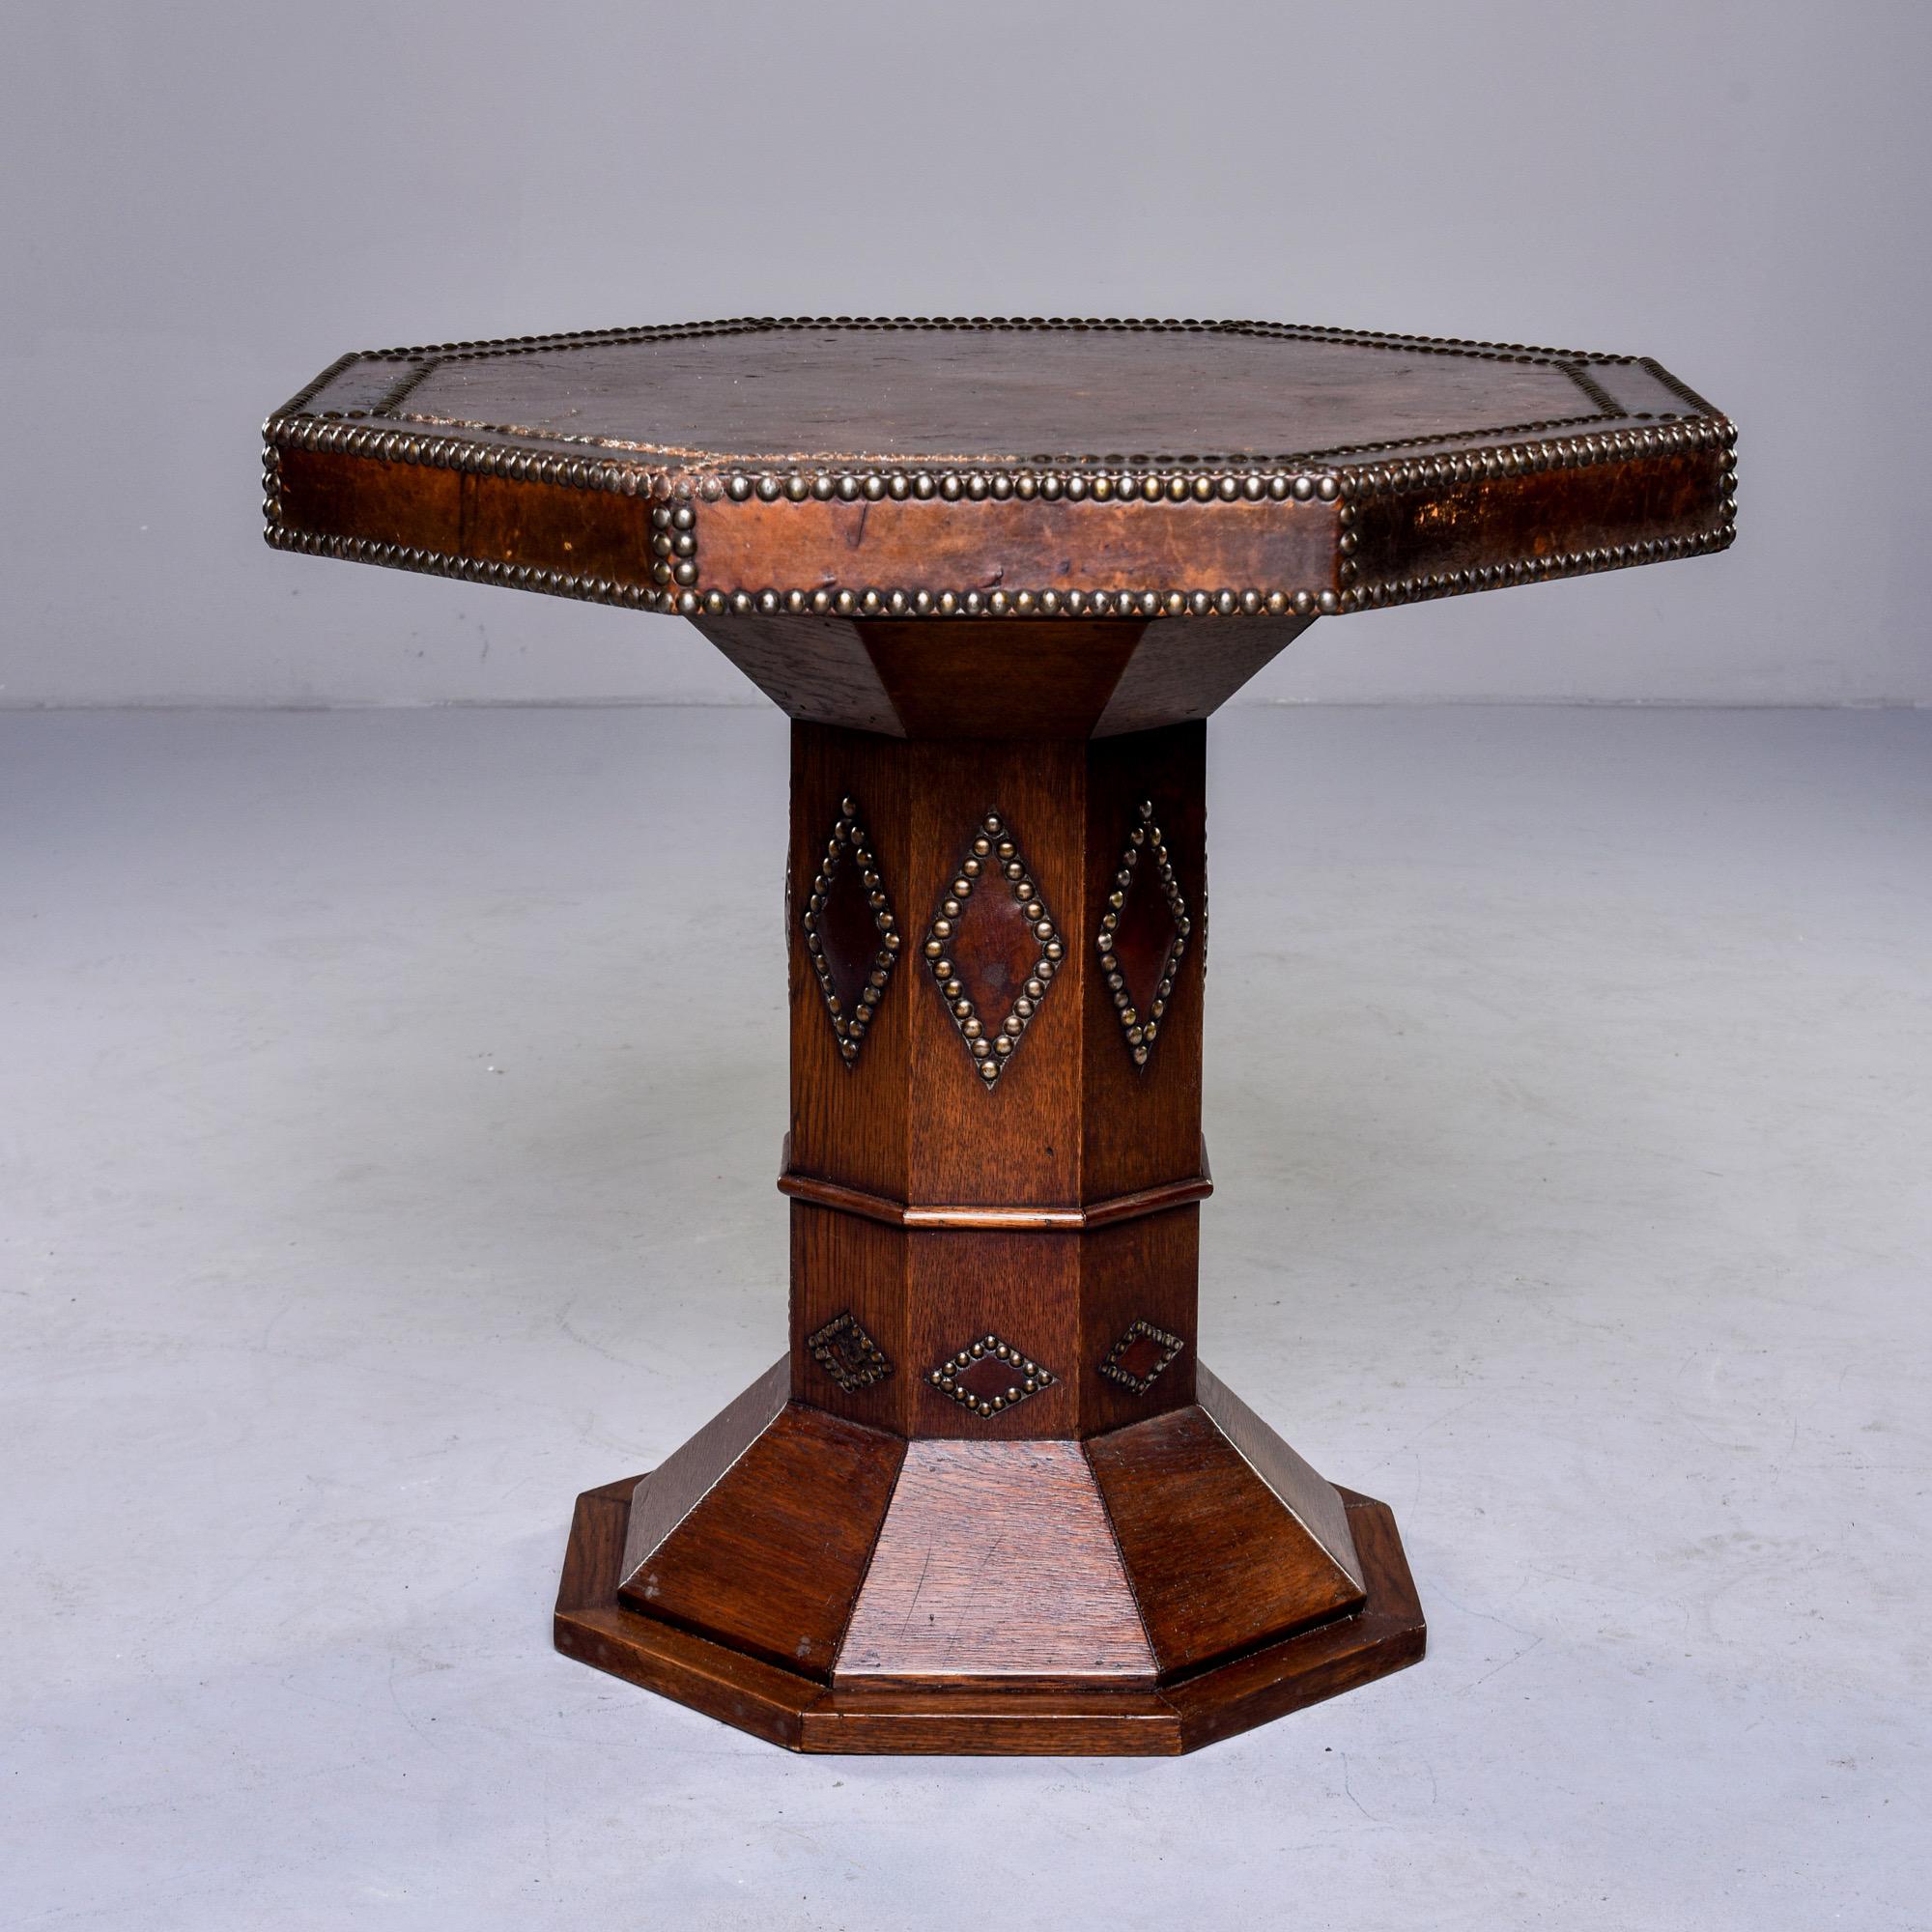 Circa 1930s French Art Deco oak side table features and eight sided top covered in leather with decorative brass nail head studs. Pedestal base has eight panels as well and center support is decorated with brass nail heads in diamond patterns.